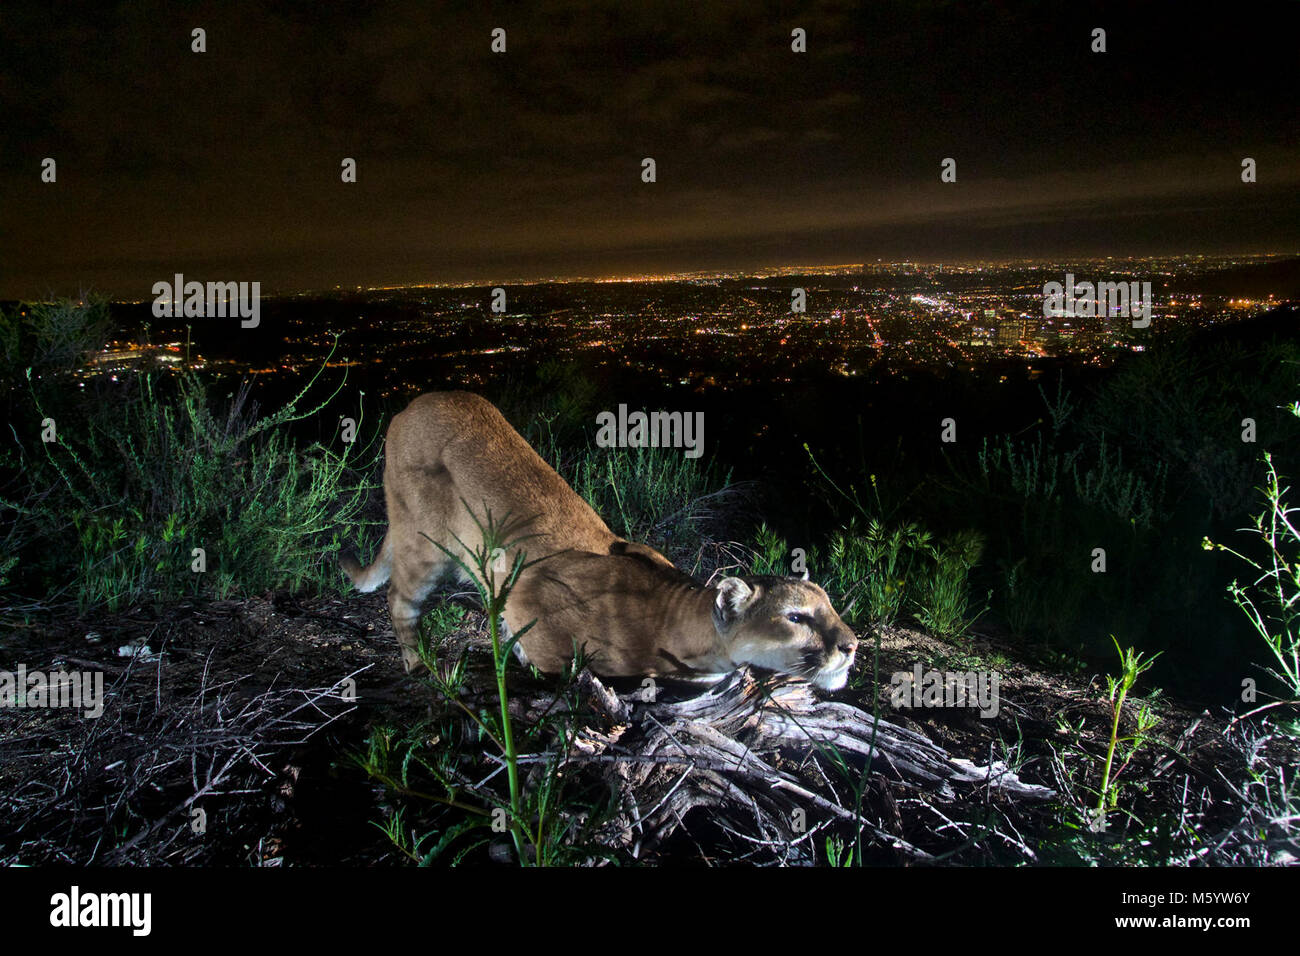 Verdugos Mountain Lion. This uncollared adult female mountain lion is cheek-rubbing, leaving her scent on a log. A few days later, P-41 (the adult male) came by and took notice. Taken in the Verdugo Mountains with Glendale and the skyscrapers of downtown L.A. in the background. Stock Photo